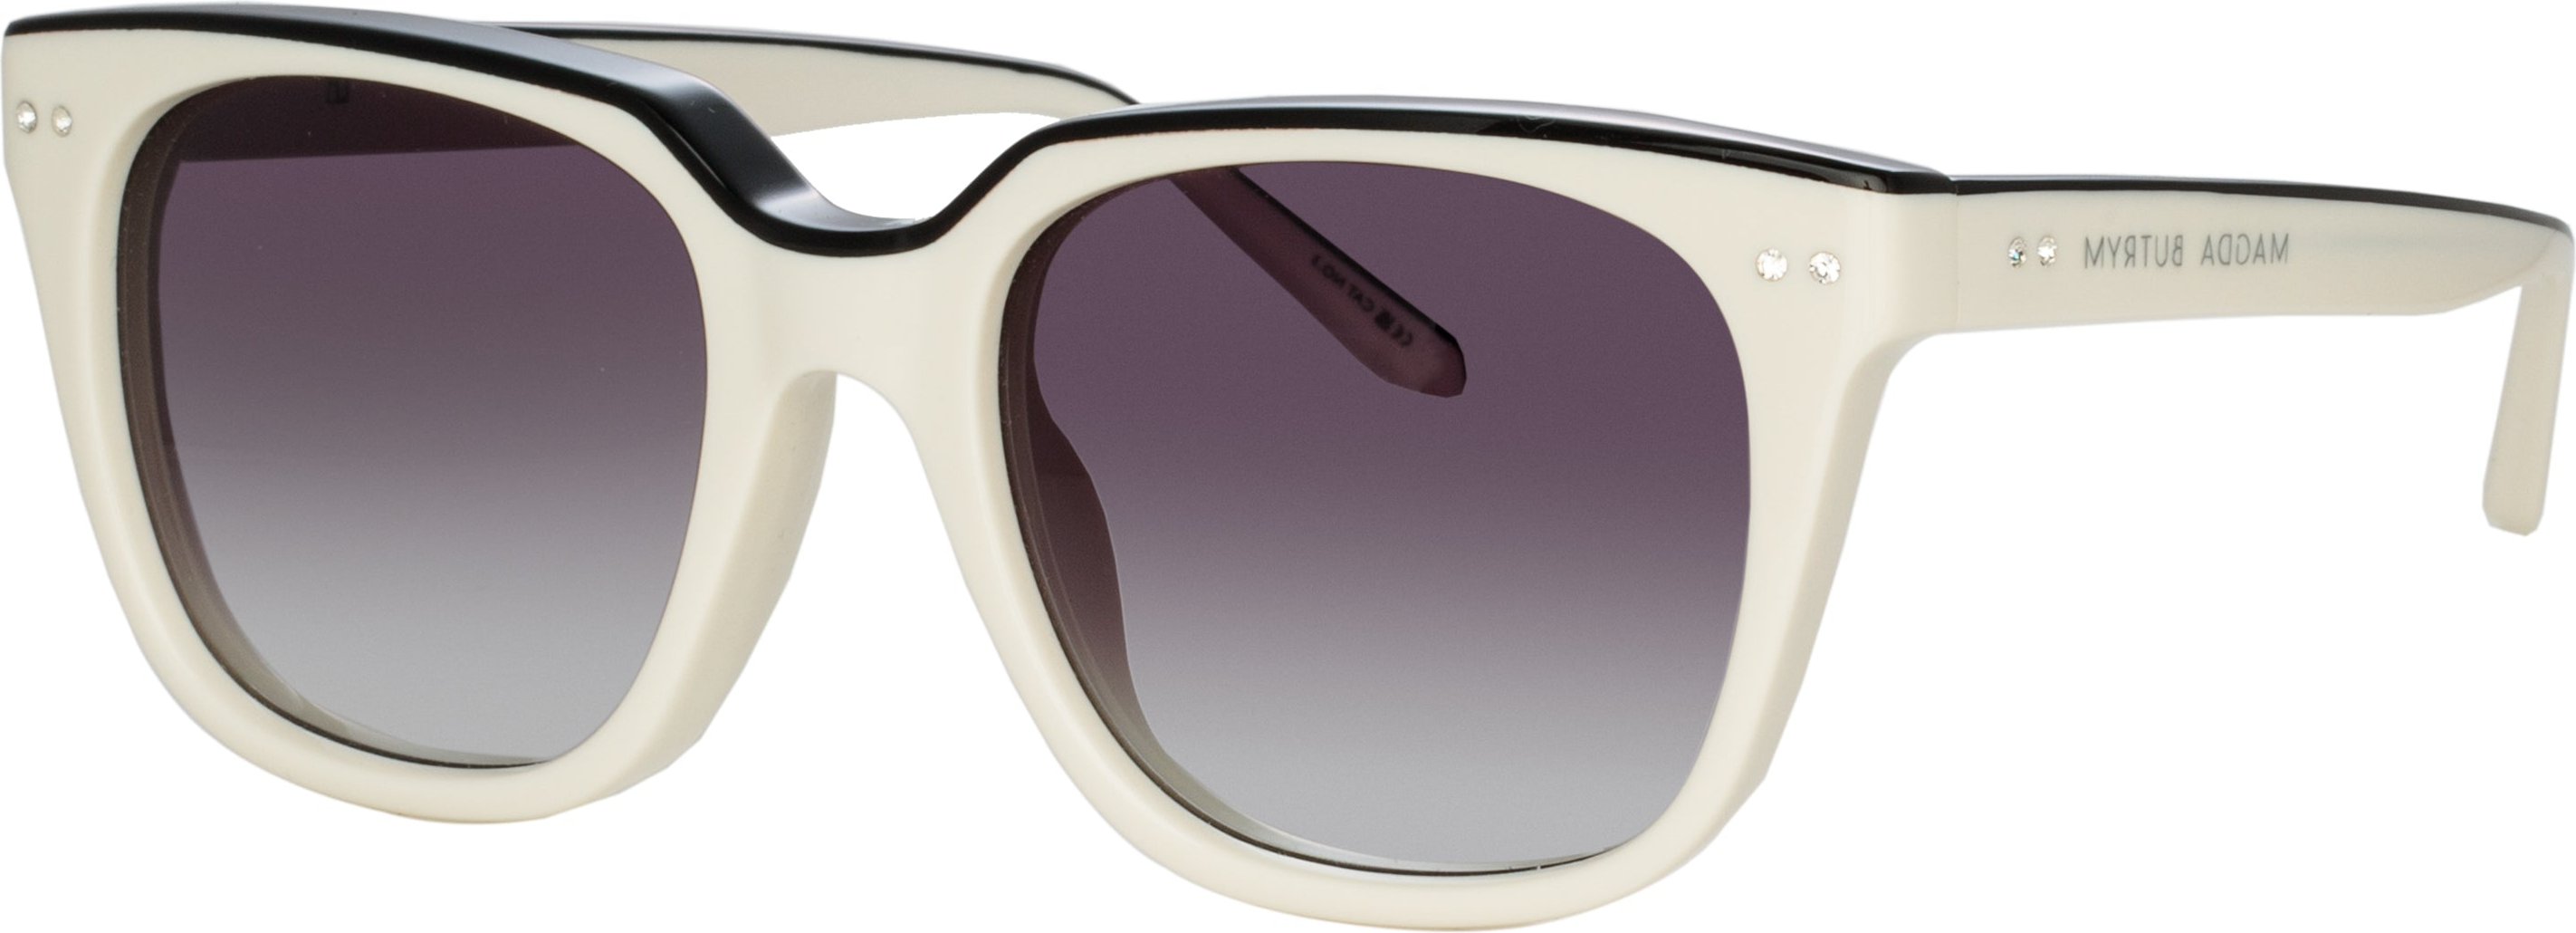 Color_MAGDA17C3SUN - Magda Butrym D-Frame Sunglasses in White and Black